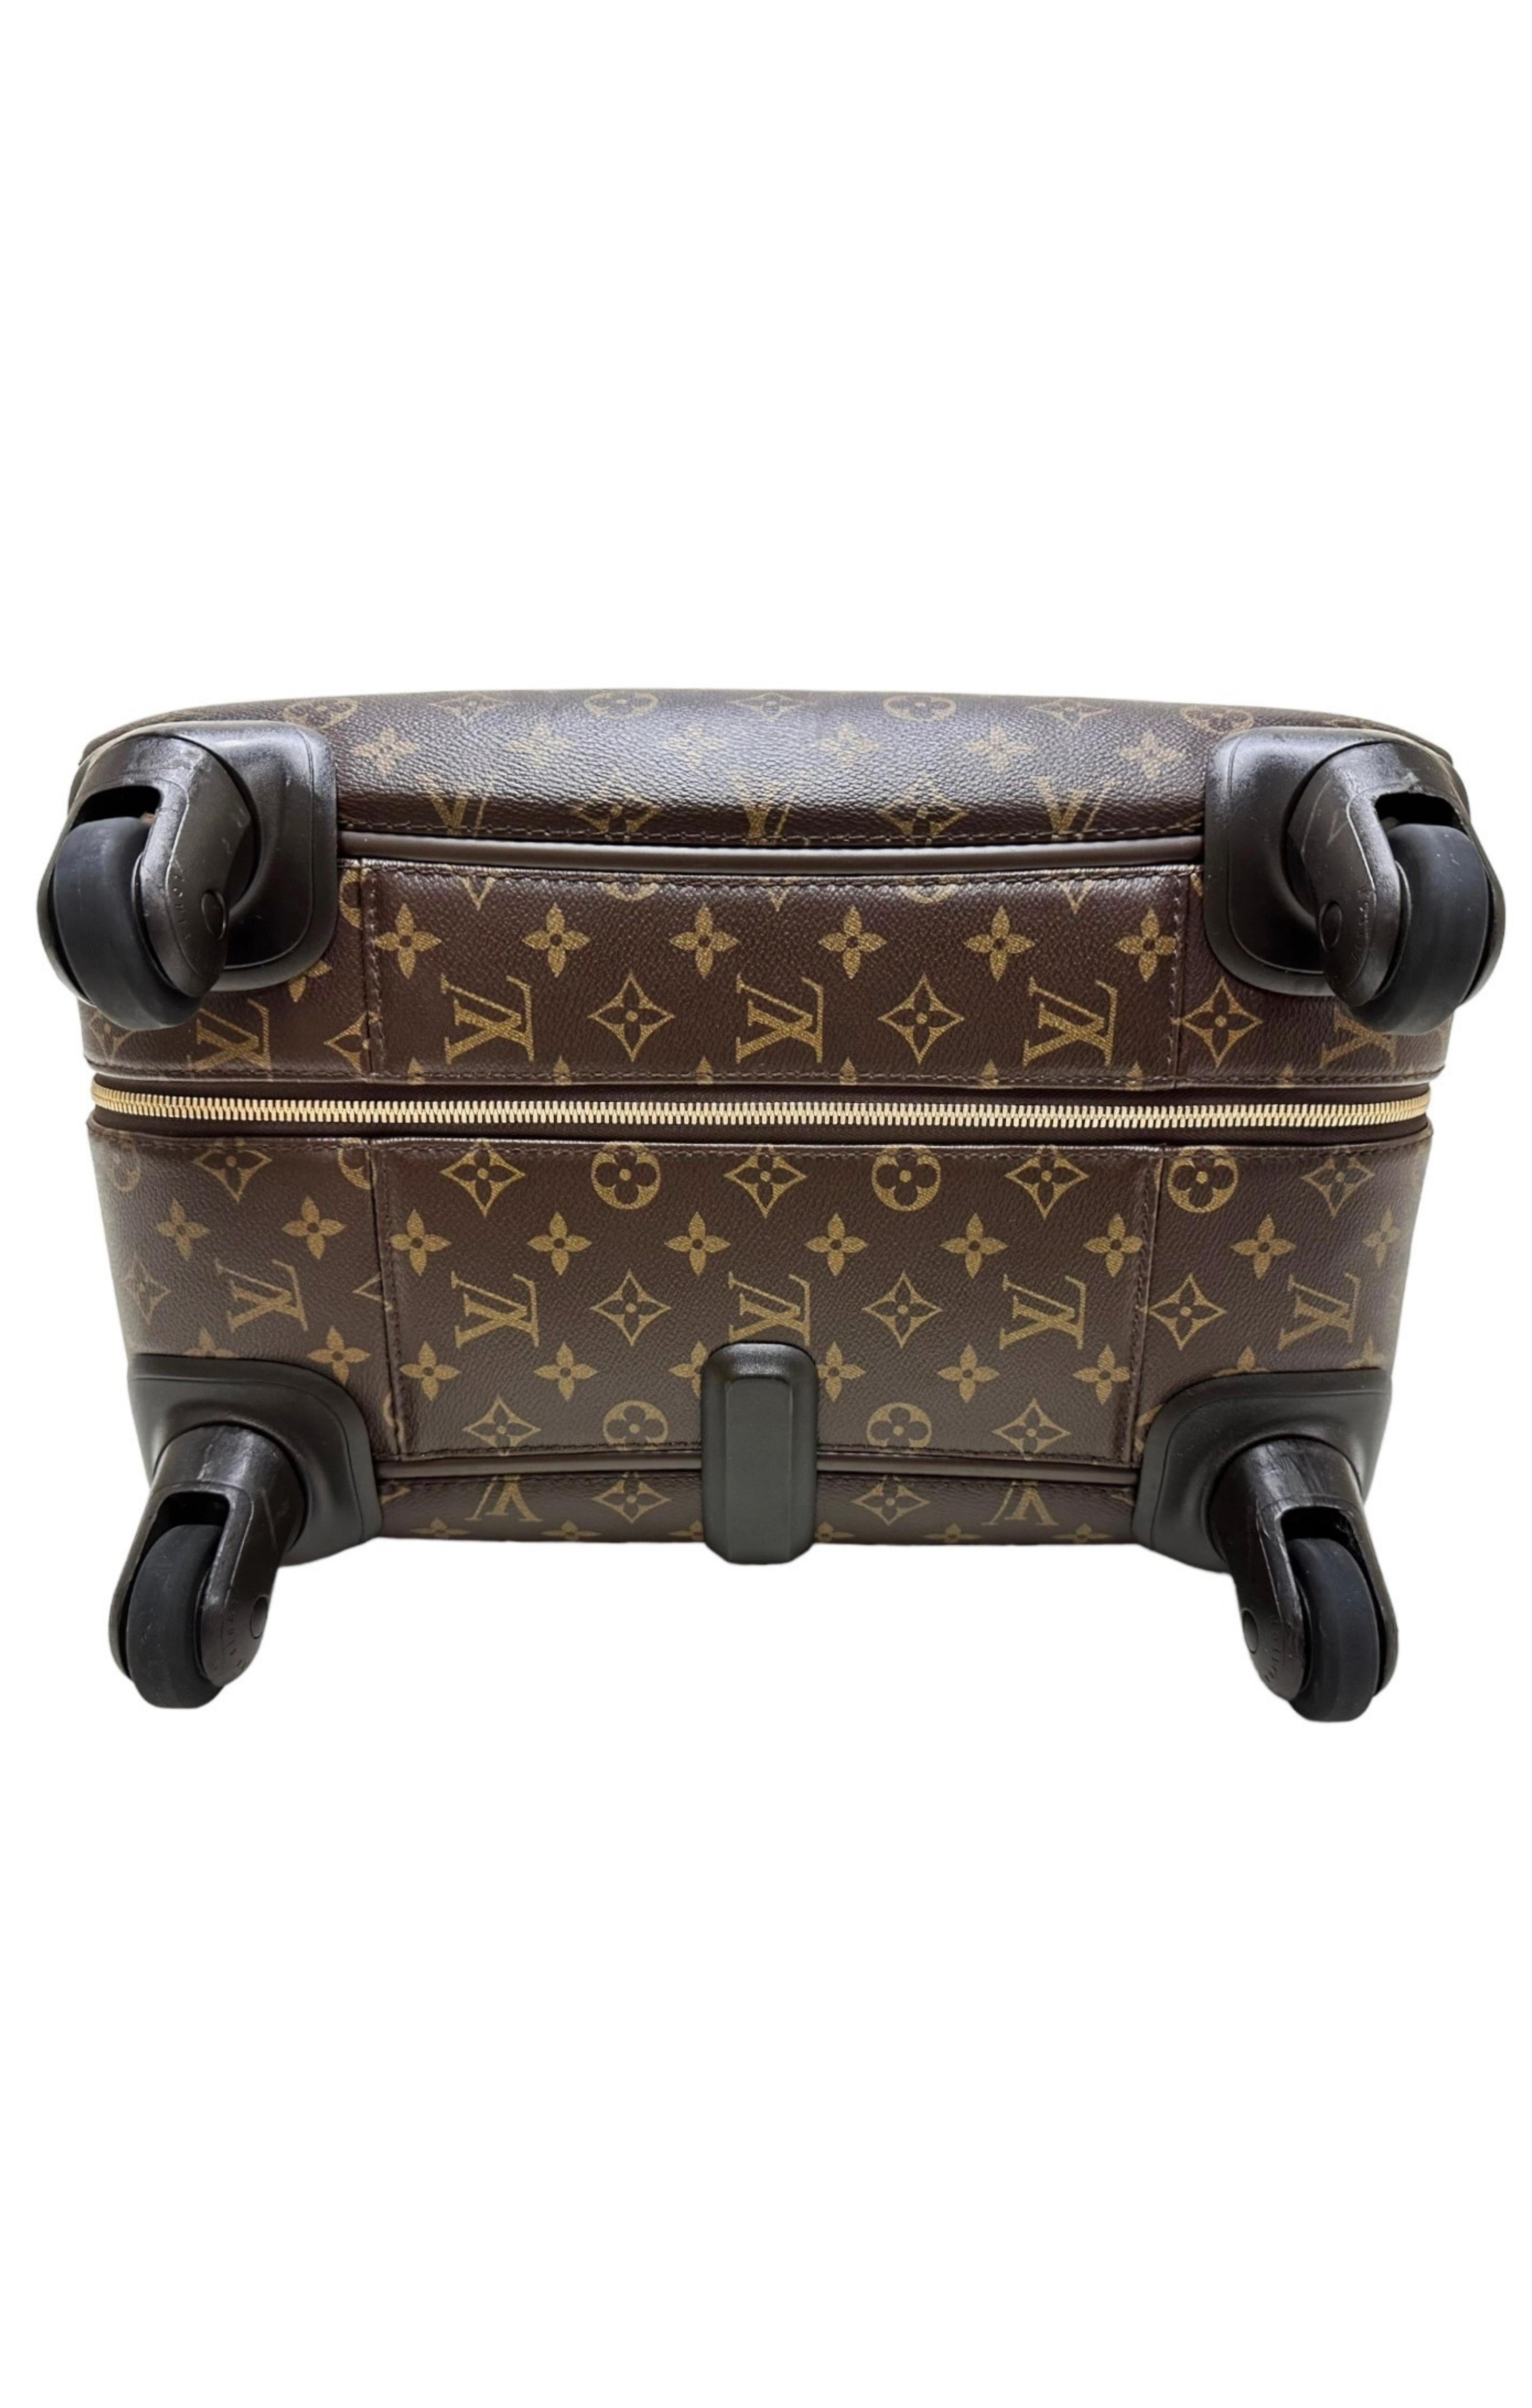 Louis Vuitton 29 and Up Travel Luggage for sale